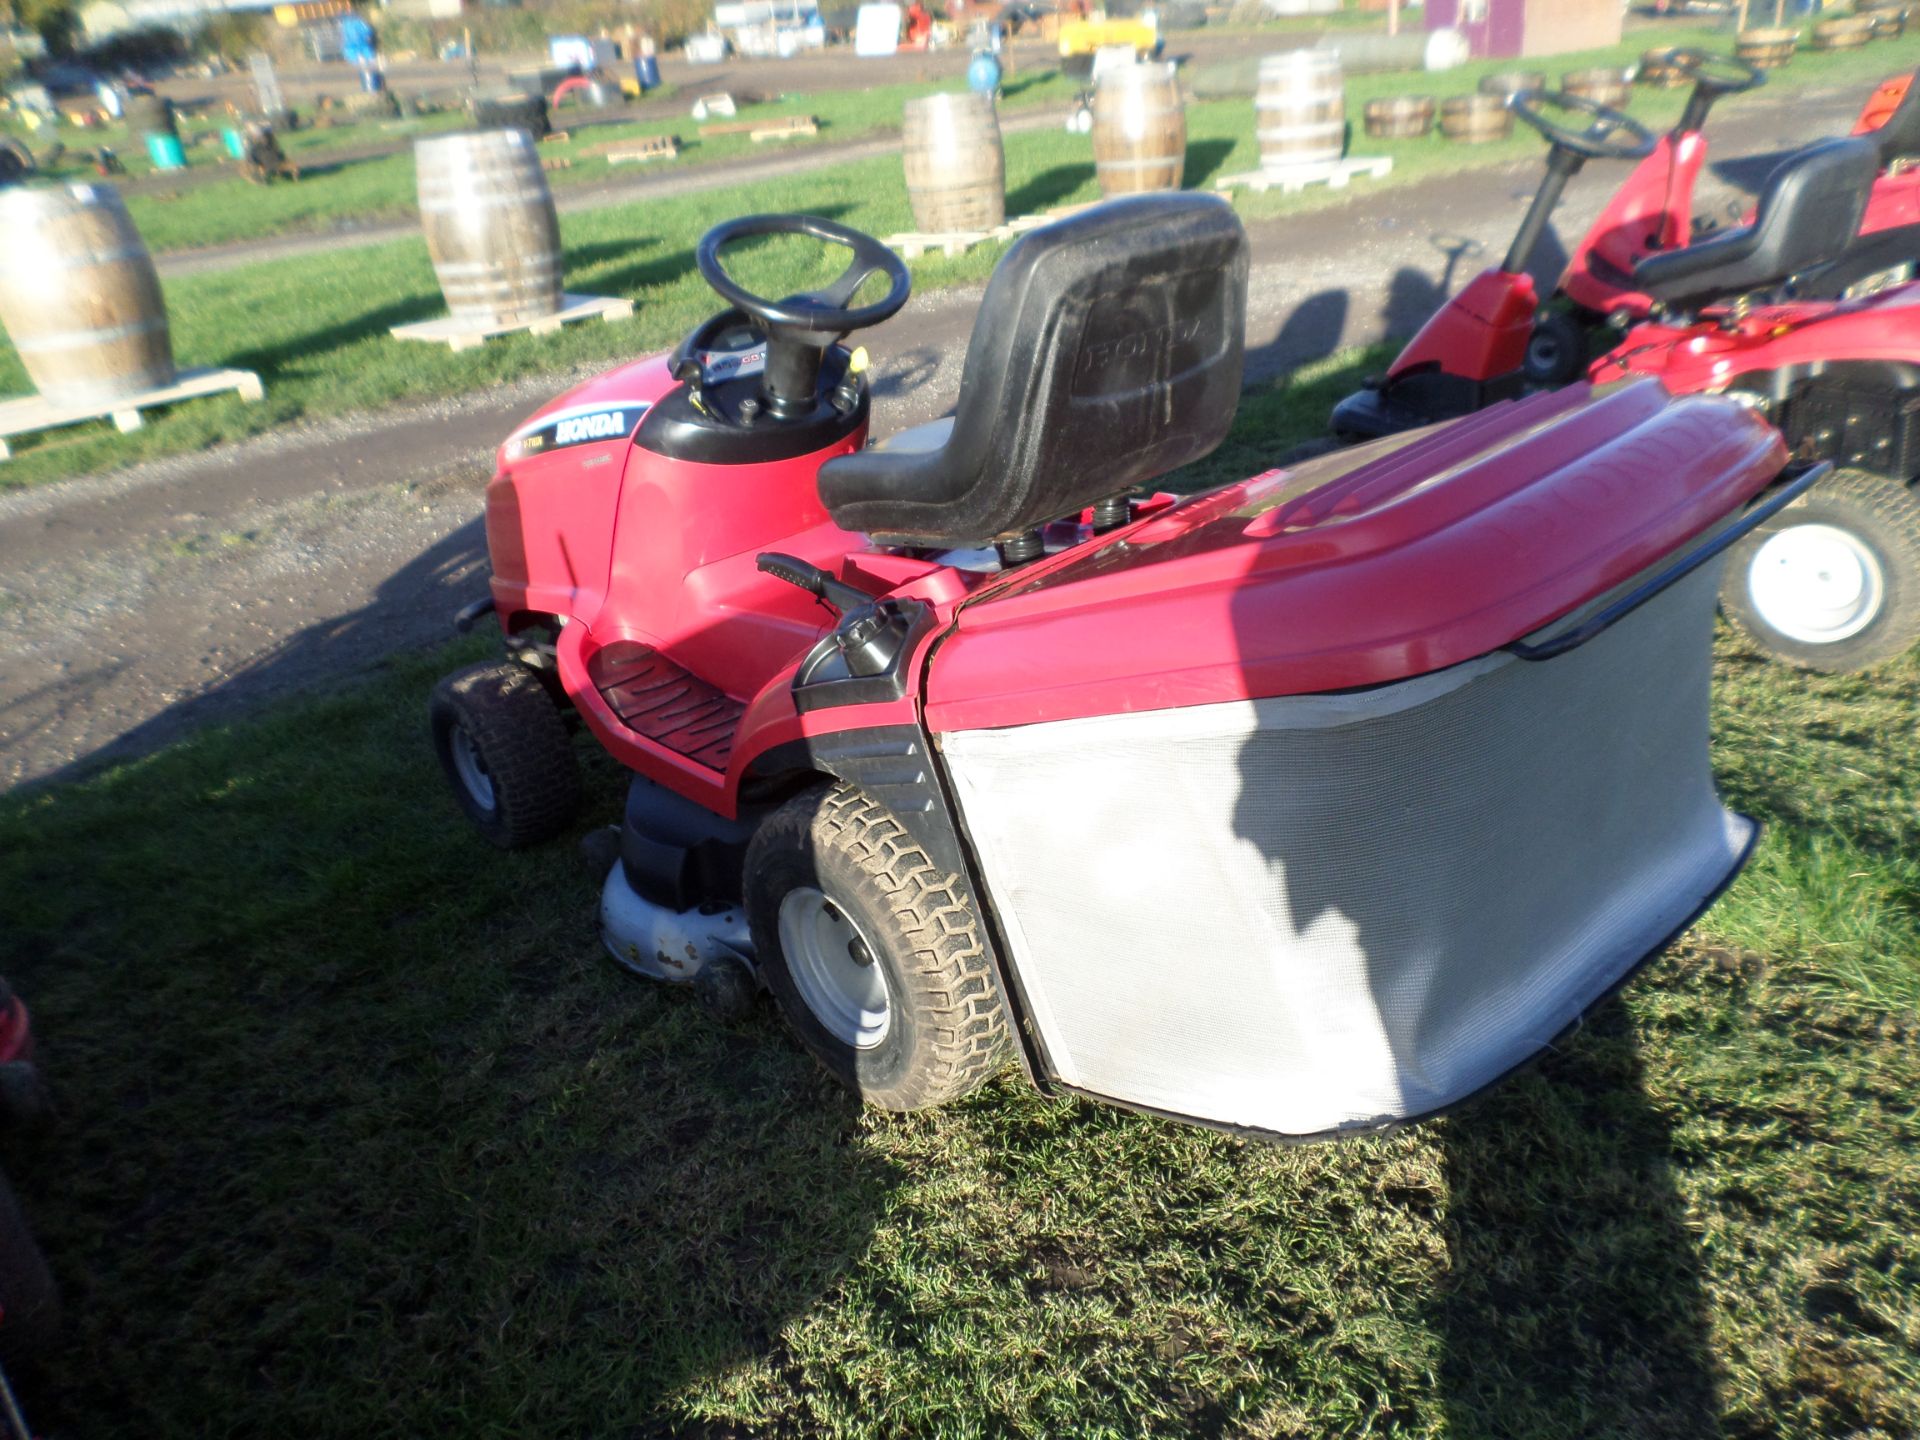 Honda 2417 V-twin 17HP hydrostatic drive ride on mower, 40" direct collect deck, electric tip - Image 3 of 3